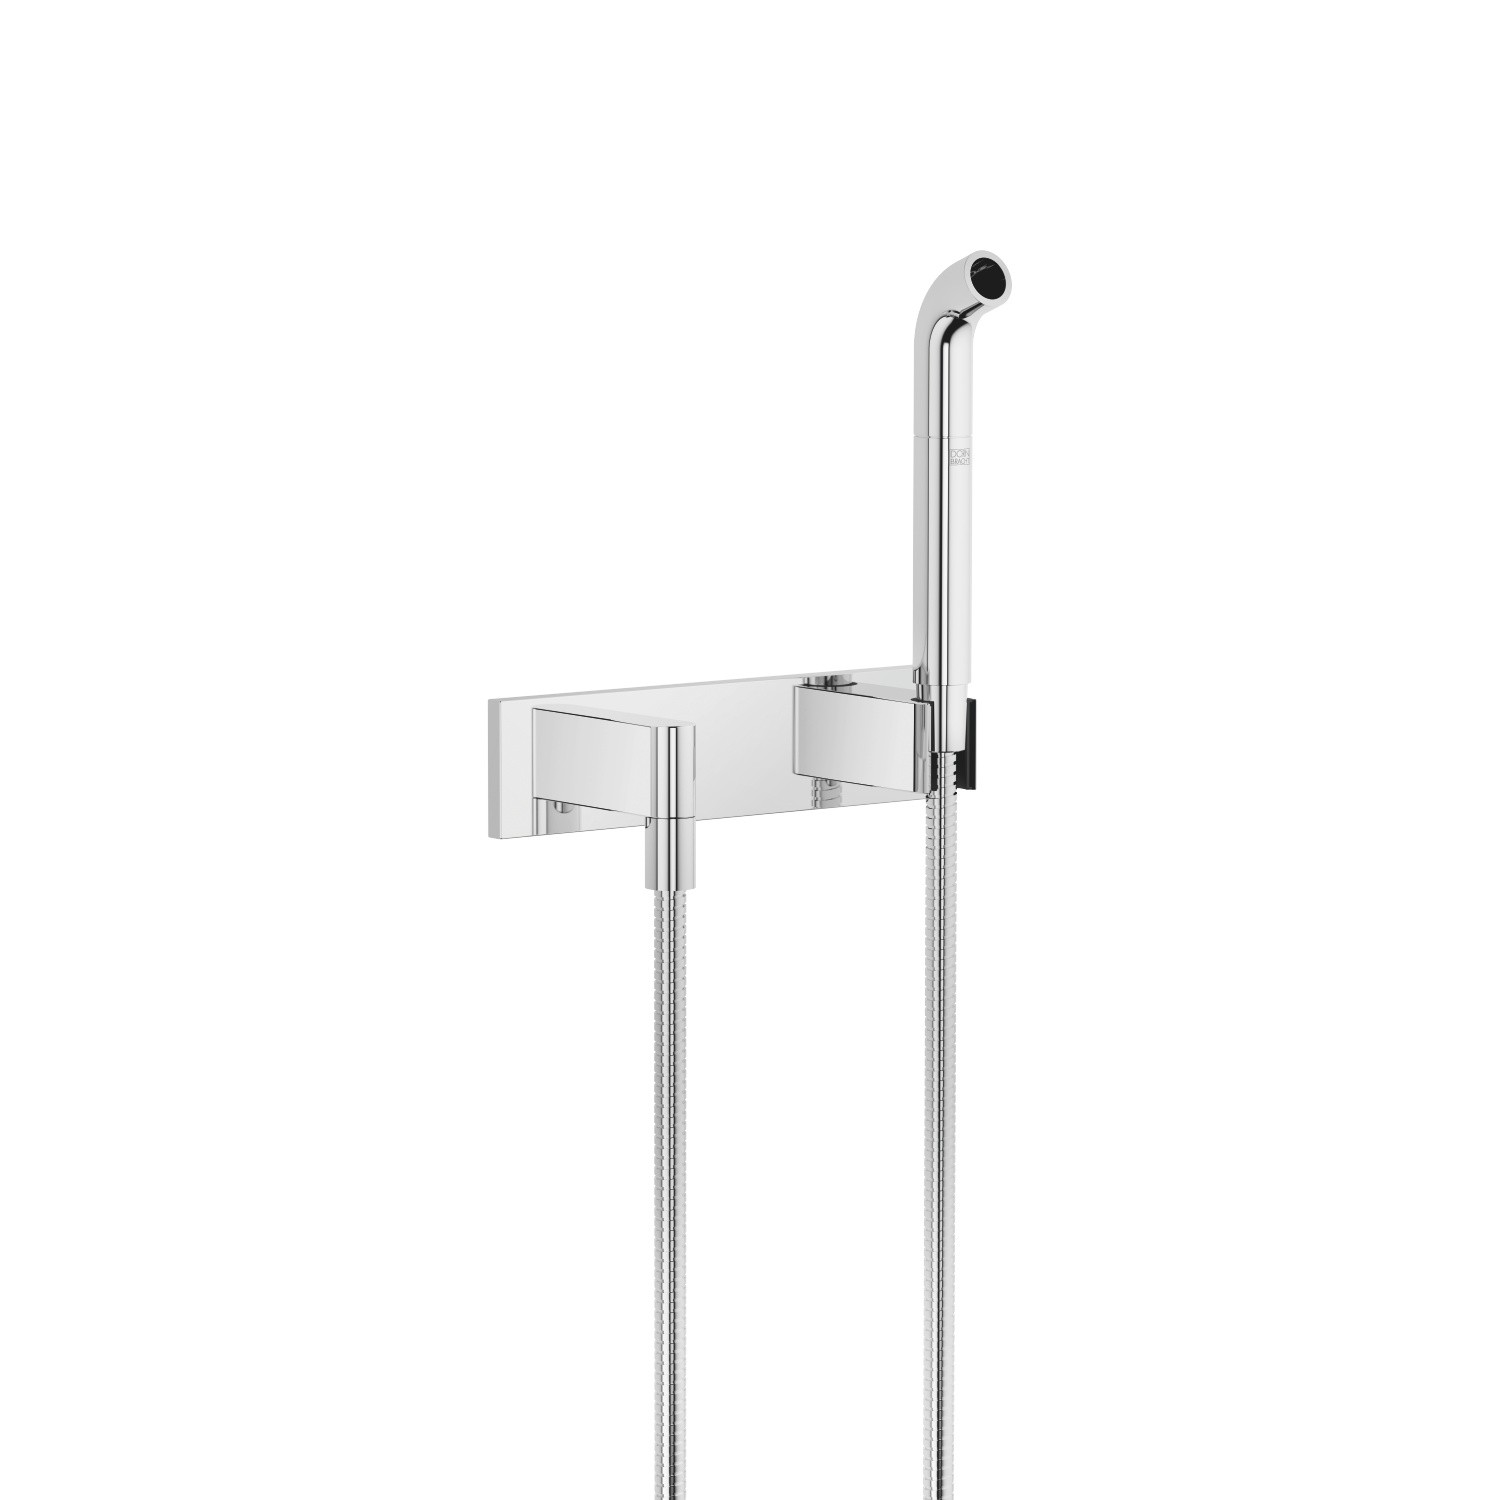 DORNBRACHT 27838979 2.5 GPM WALL MOUNT AFFUSION PIPE HAND SHOWER FOR KNEIPP TREATMENTS WITH COVER PLATE